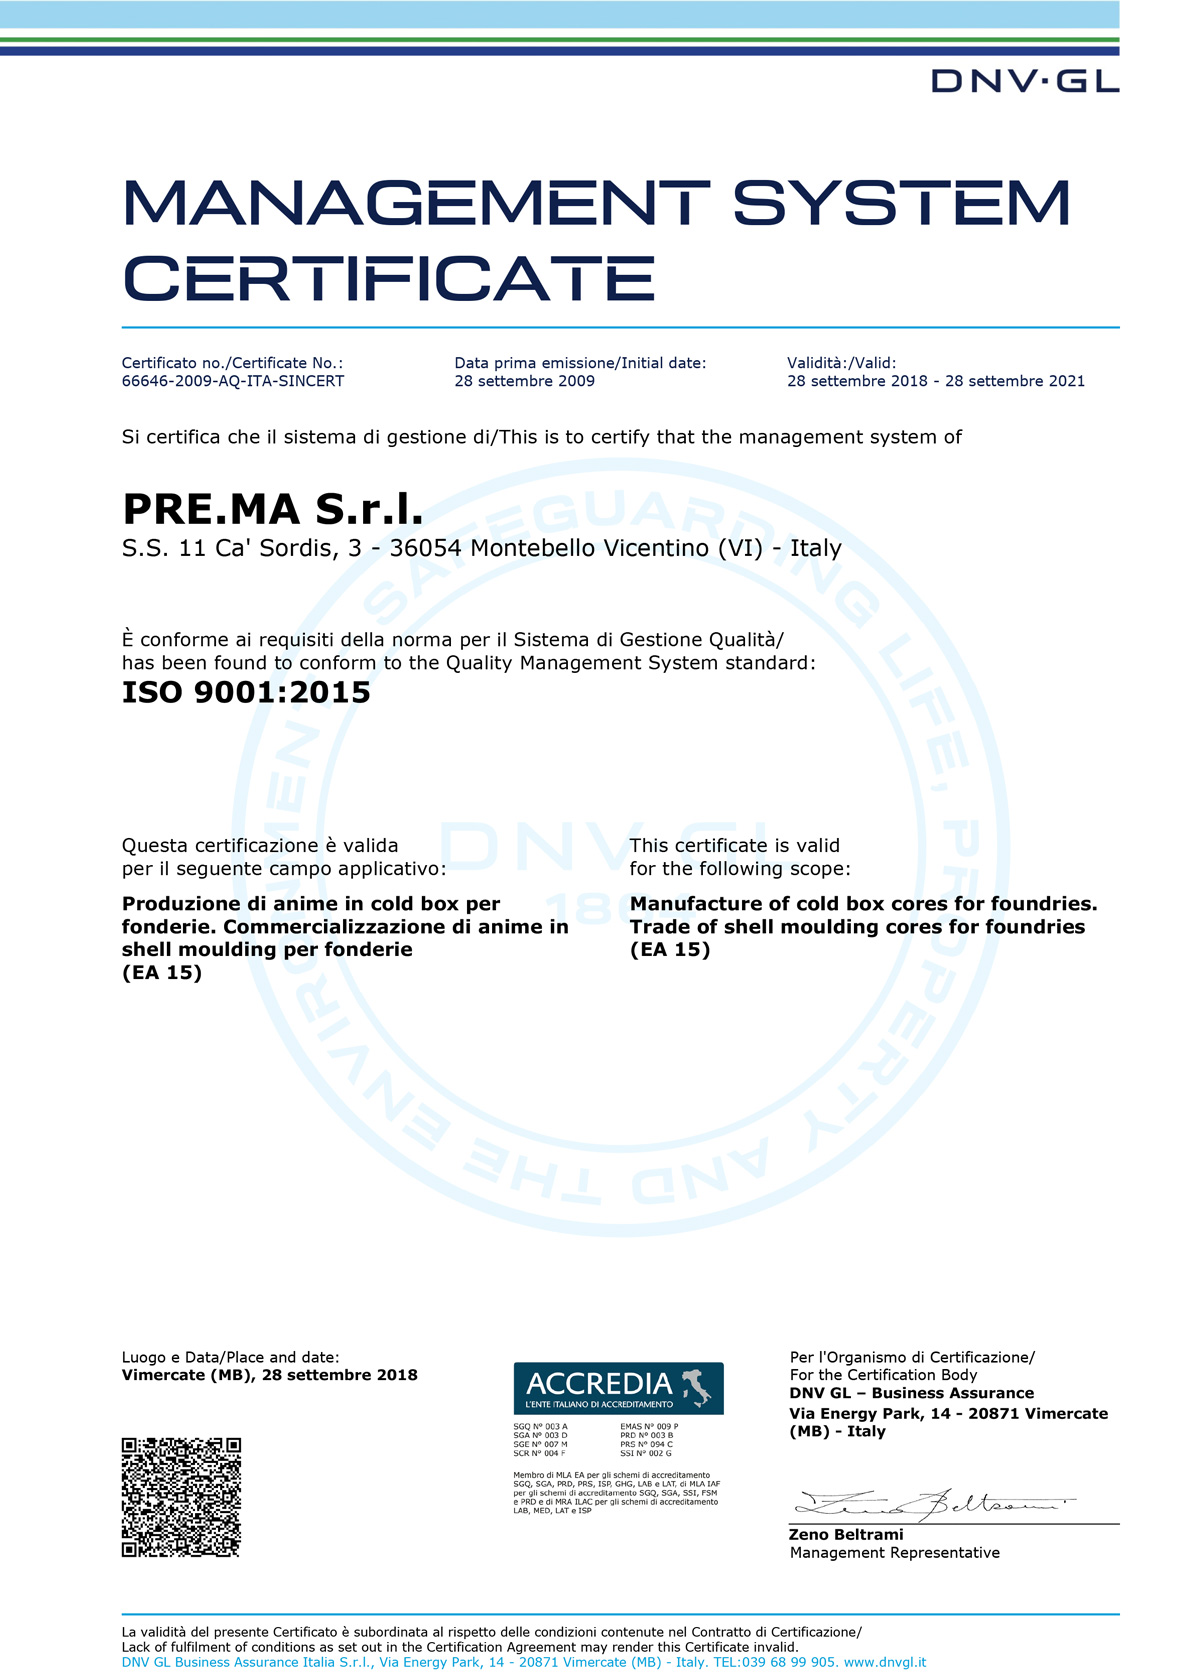 ISO9001_2015